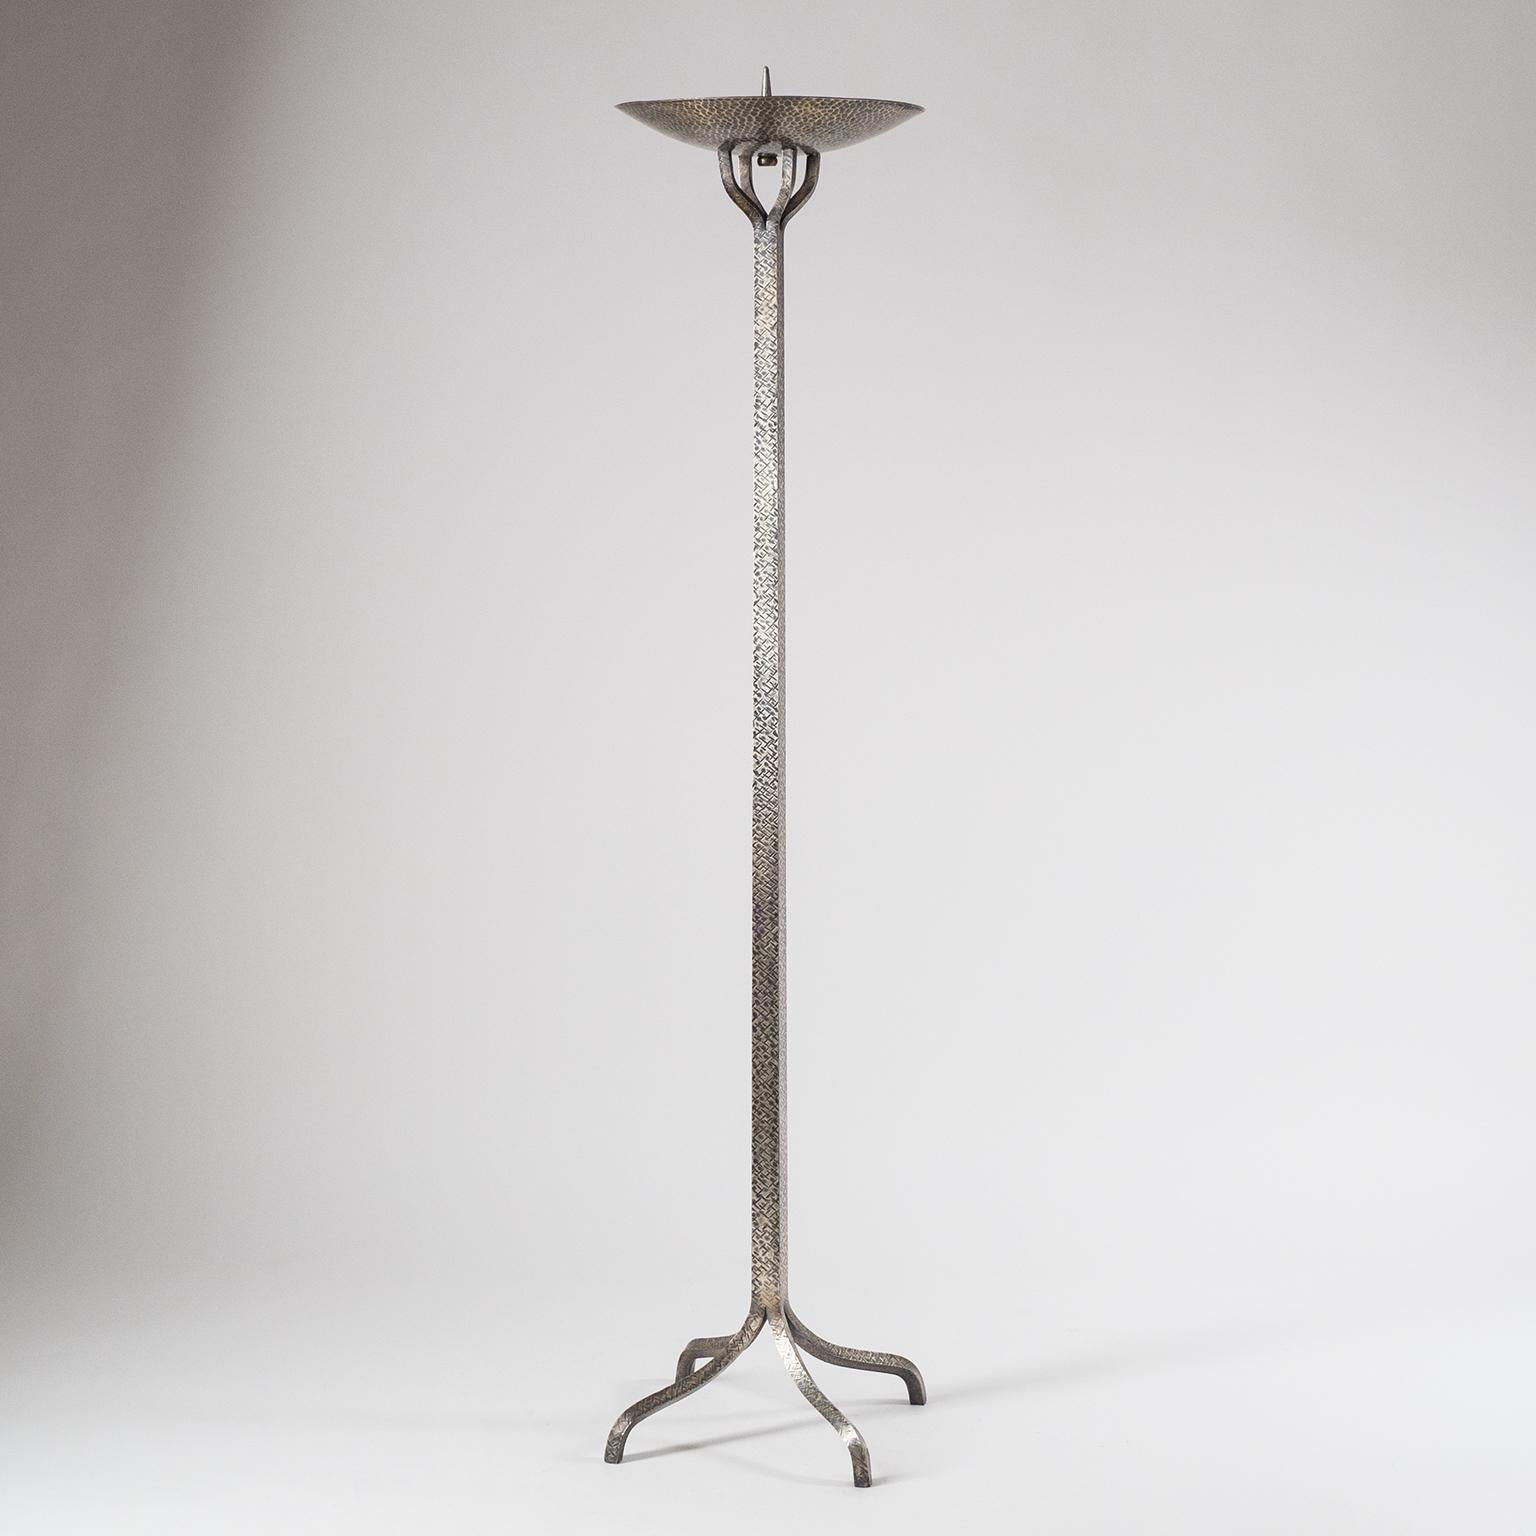 Rare Art Deco altar candlestick from Austria, early 20th century. Beautiful design and craftsmanship with the entire Stand worked from a single piece of solid brass, wrought and hammered with a silver finish. The large candle bowl has a diameter of